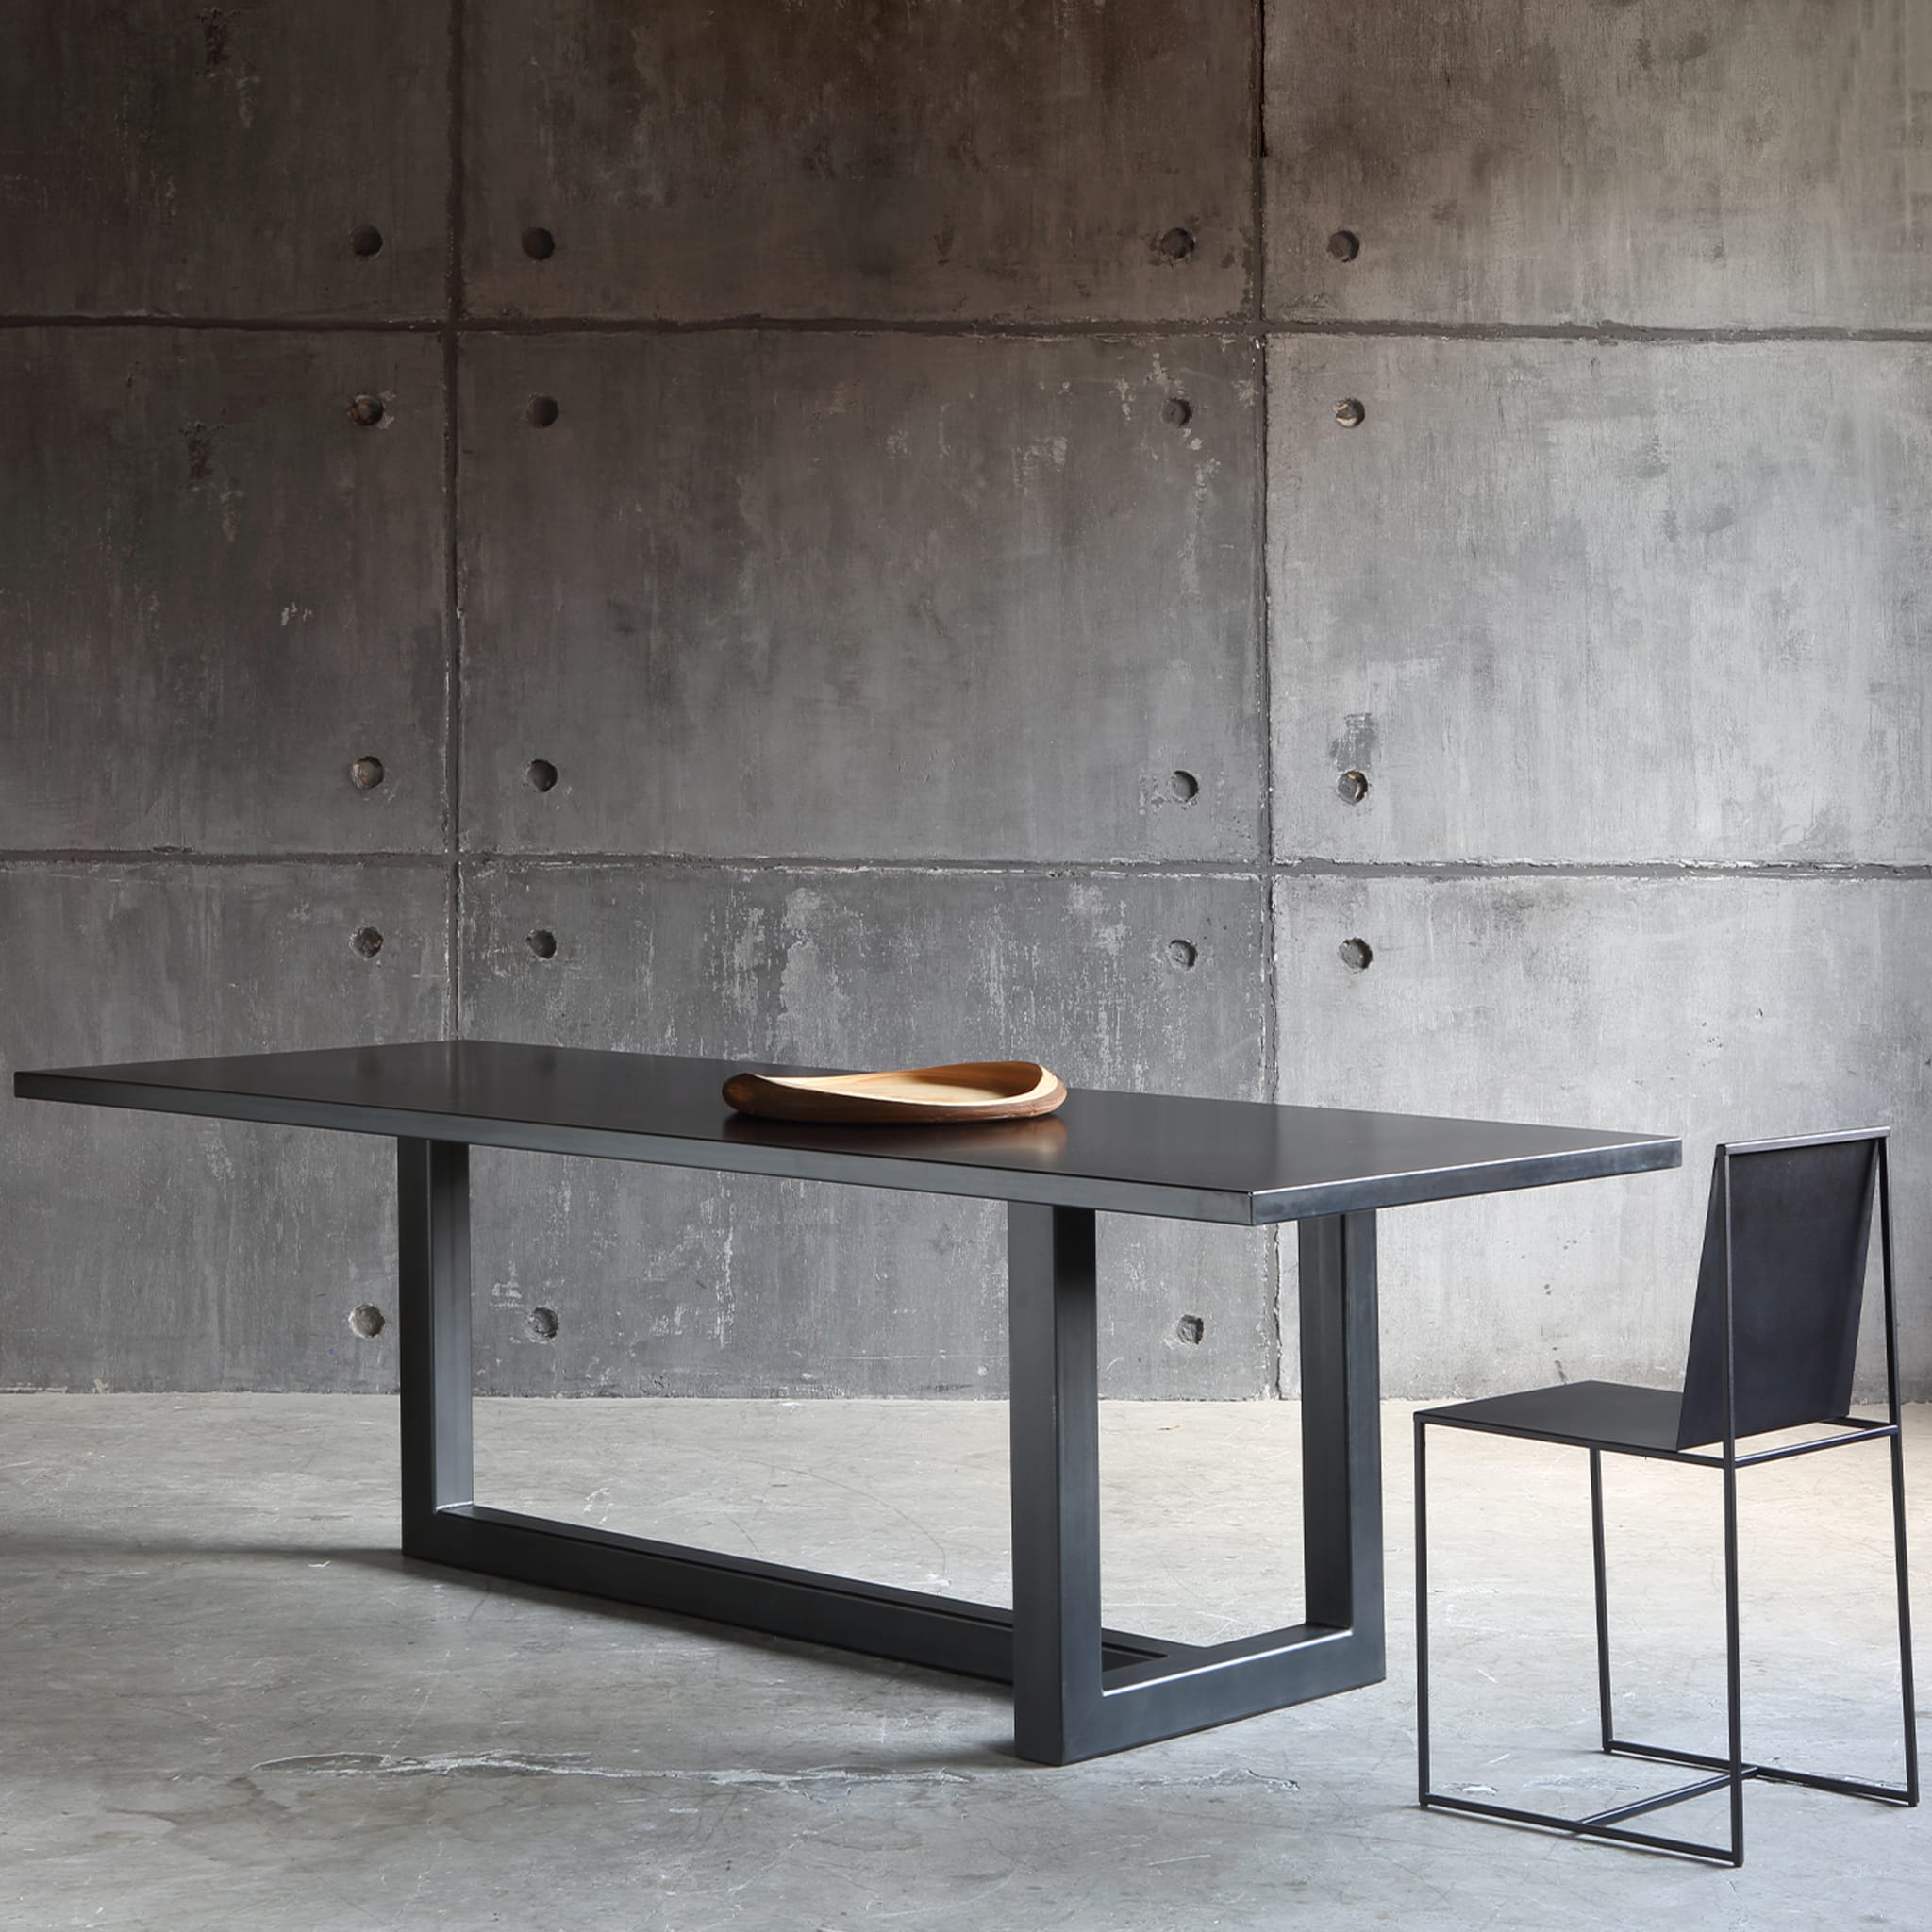 Augustin Dining Table by Maurizio Peregalli - Alternative view 2